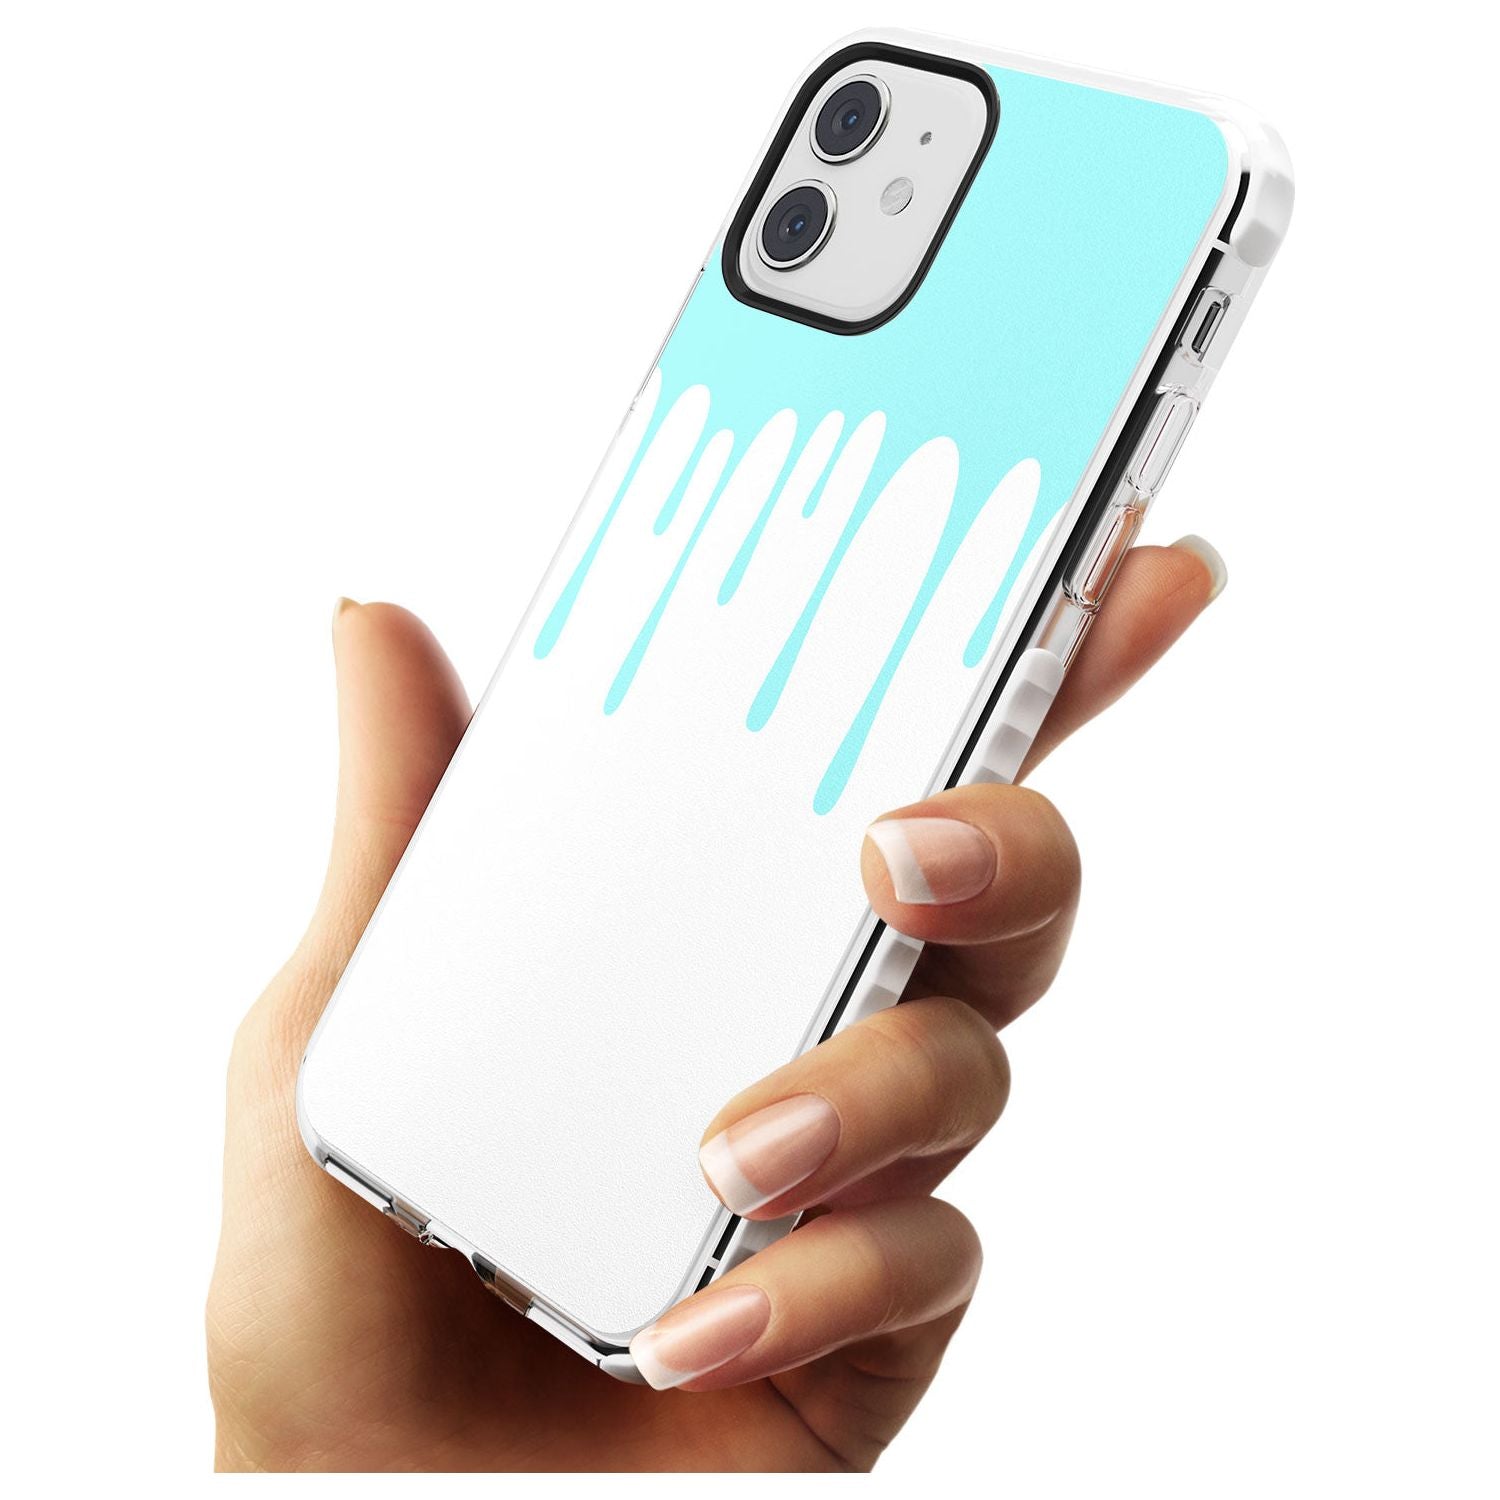 Melted Effect: Teal & White iPhone Case Impact Phone Case Warehouse 11